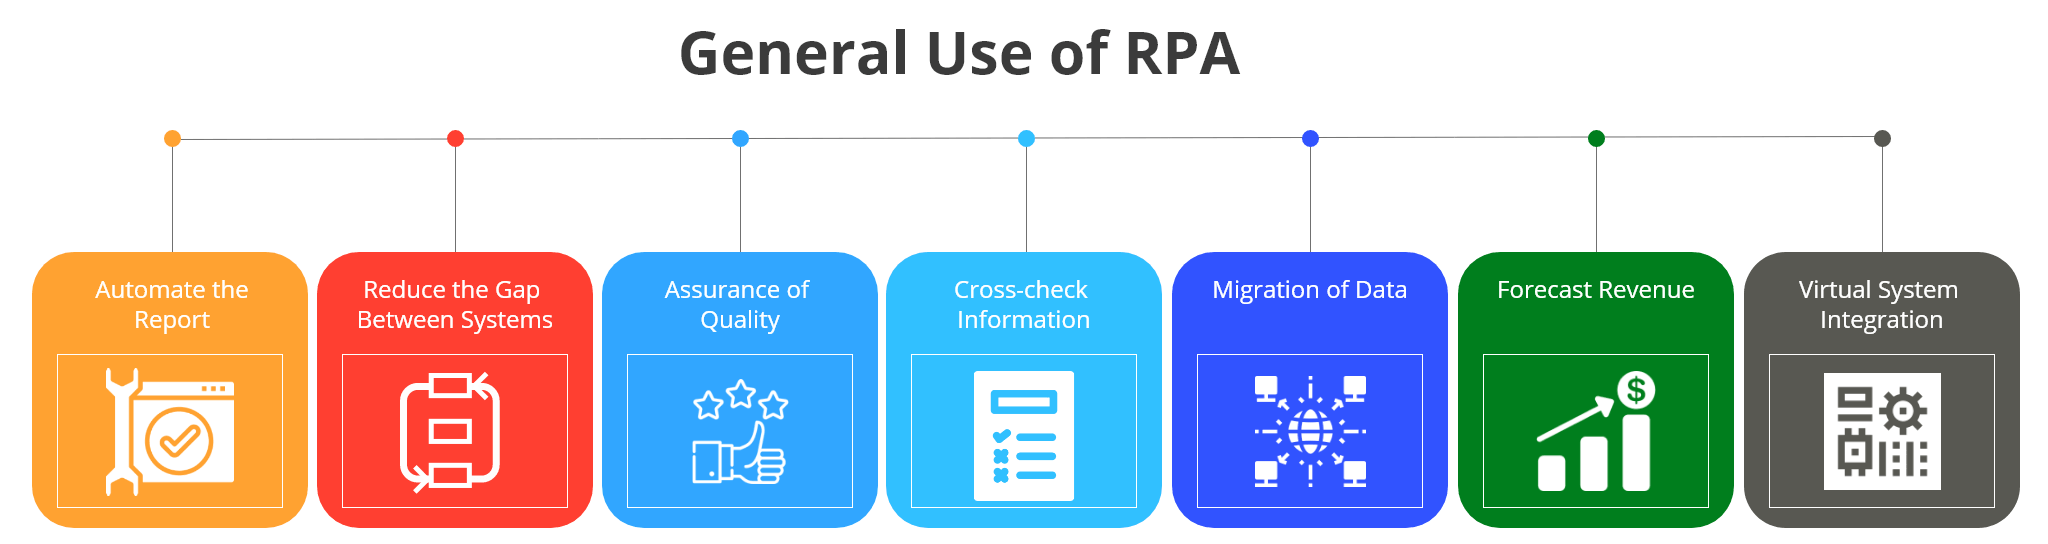 general-use-of-rpa.png